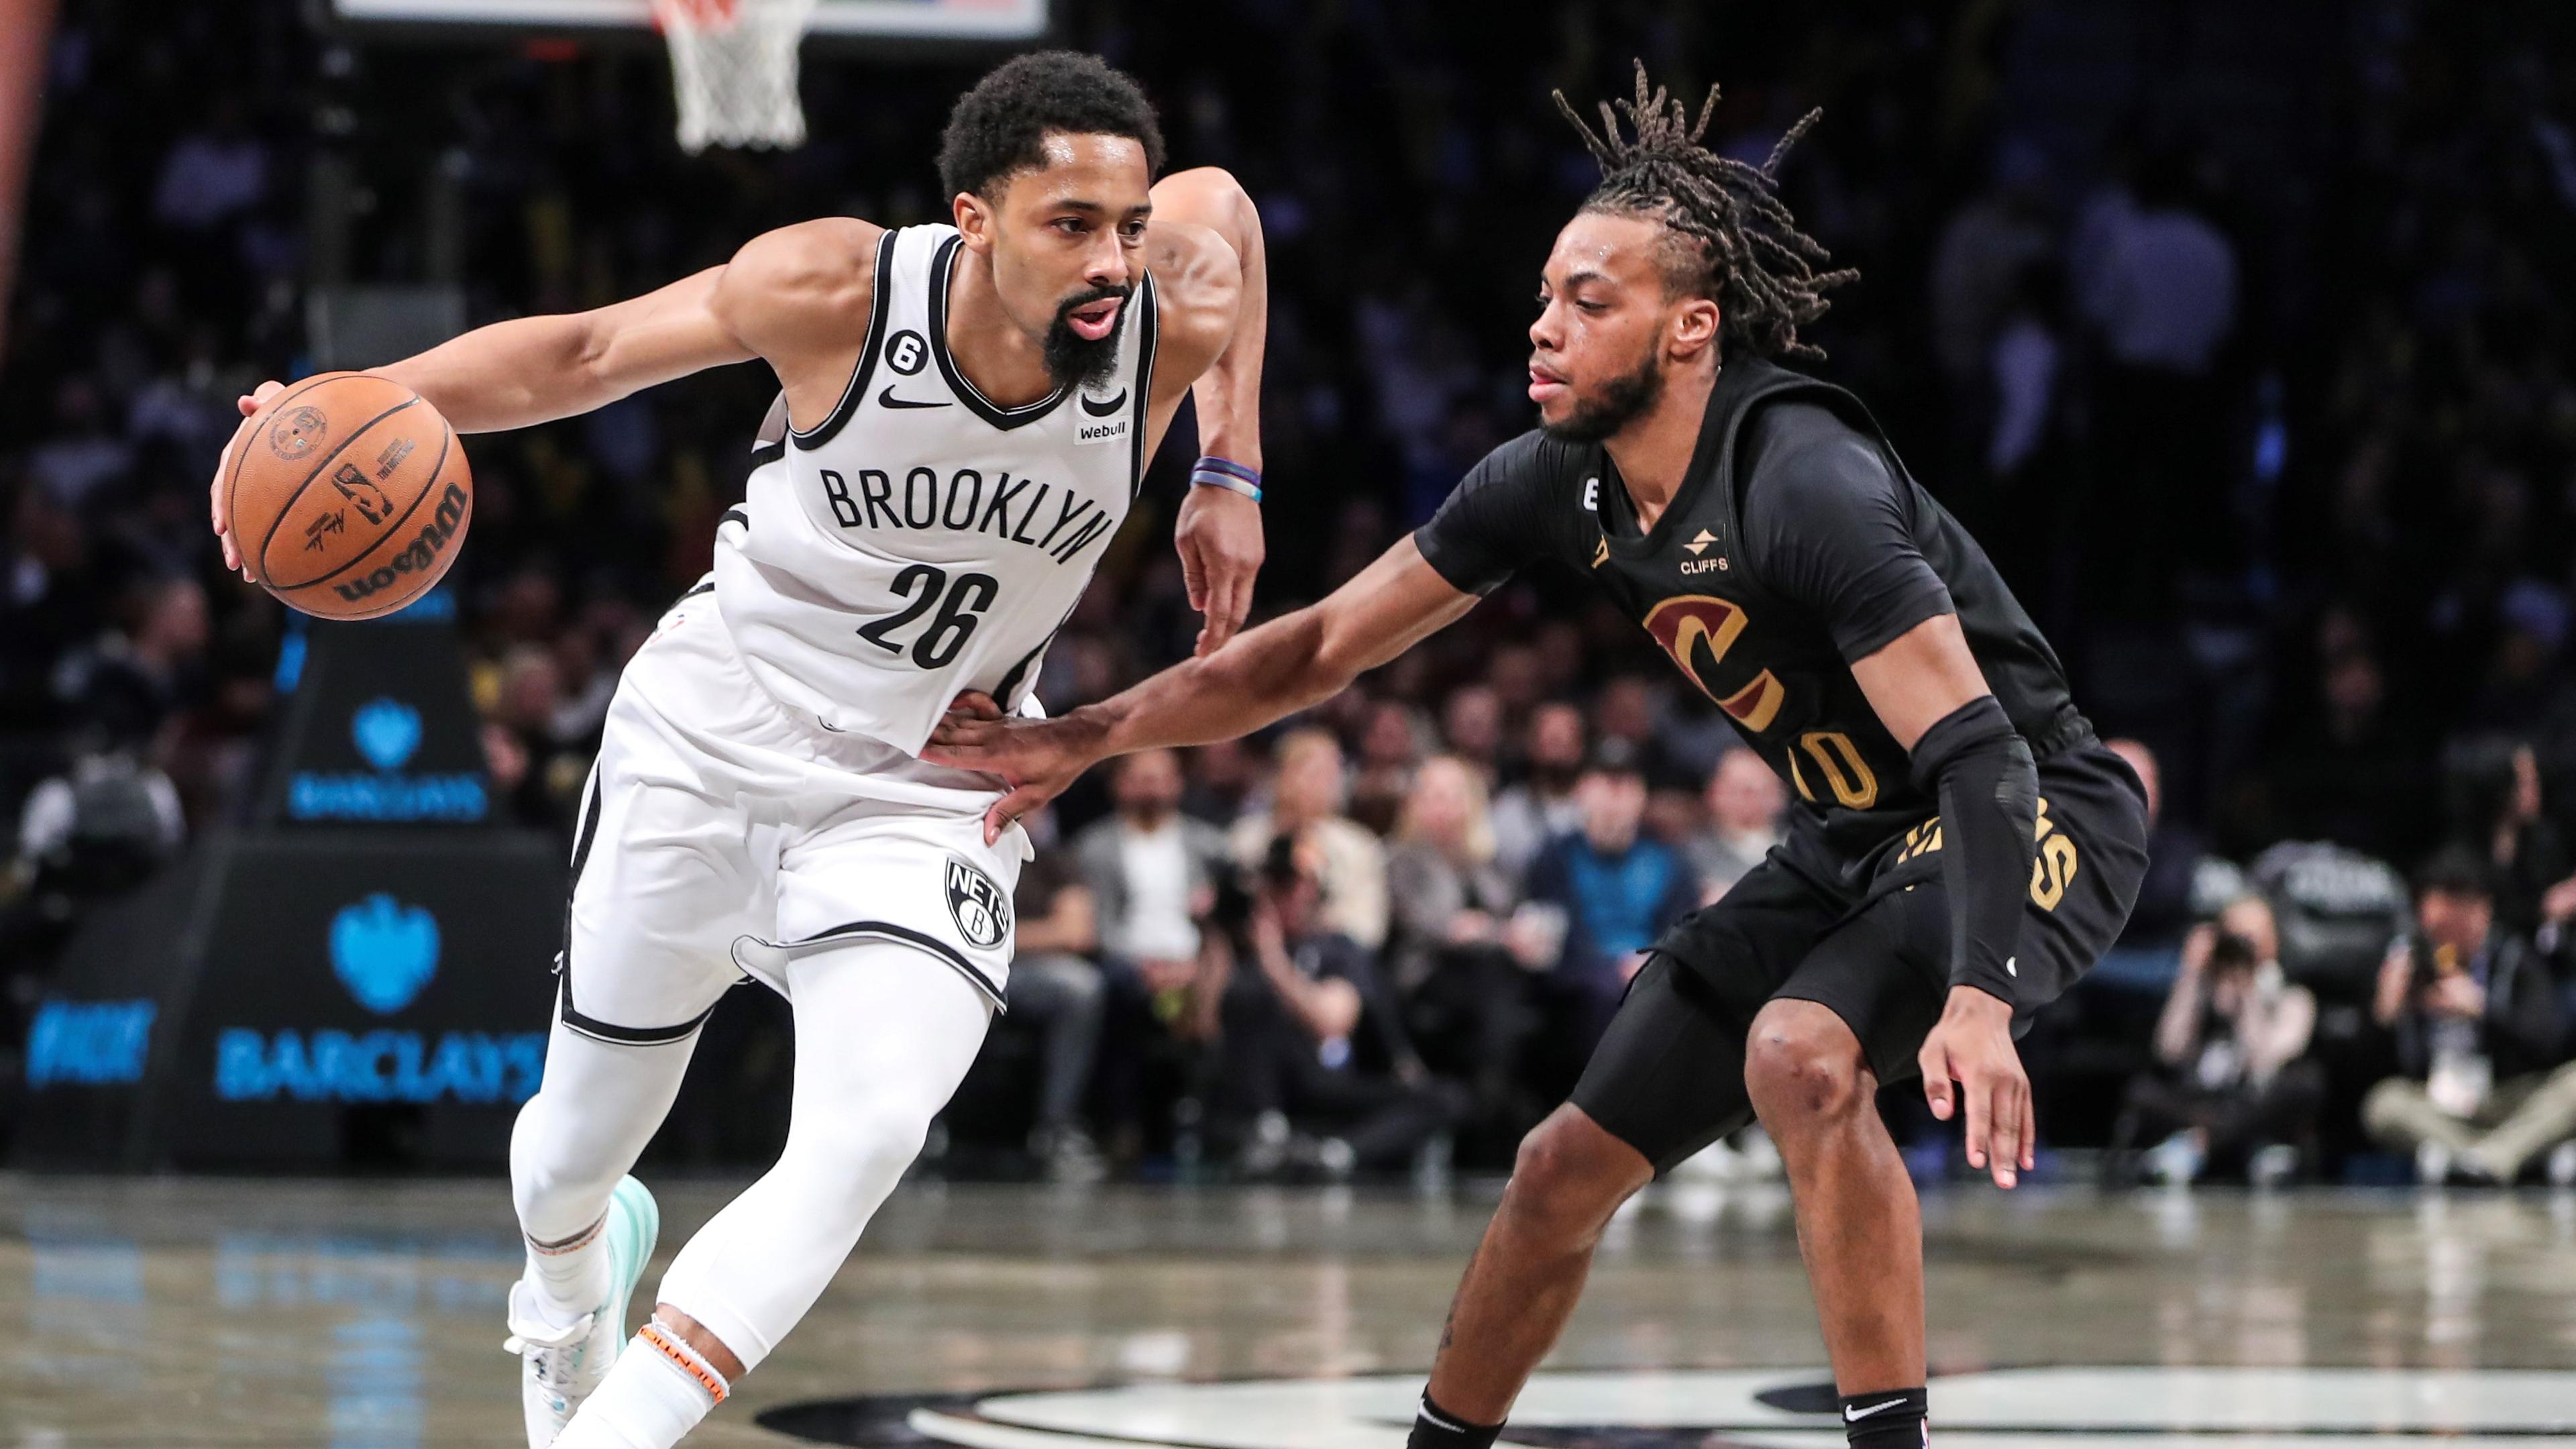 Mar 23, 2023; Brooklyn, New York, USA; Brooklyn Nets guard Spencer Dinwiddie (26) moves the ball against Cleveland Cavaliers guard Darius Garland (10) in the third quarter at Barclays Center. Mandatory Credit: Wendell Cruz-USA TODAY Sports / Mar 23, 2023; Brooklyn, New York, USA; Brooklyn Nets guard Spencer Dinwiddie (26) moves the ball against Cleveland Cavaliers guard Darius Garland (10) in the third quarter at Barclays Center. Mandatory Credit: Wendell Cruz-USA TODAY Sports